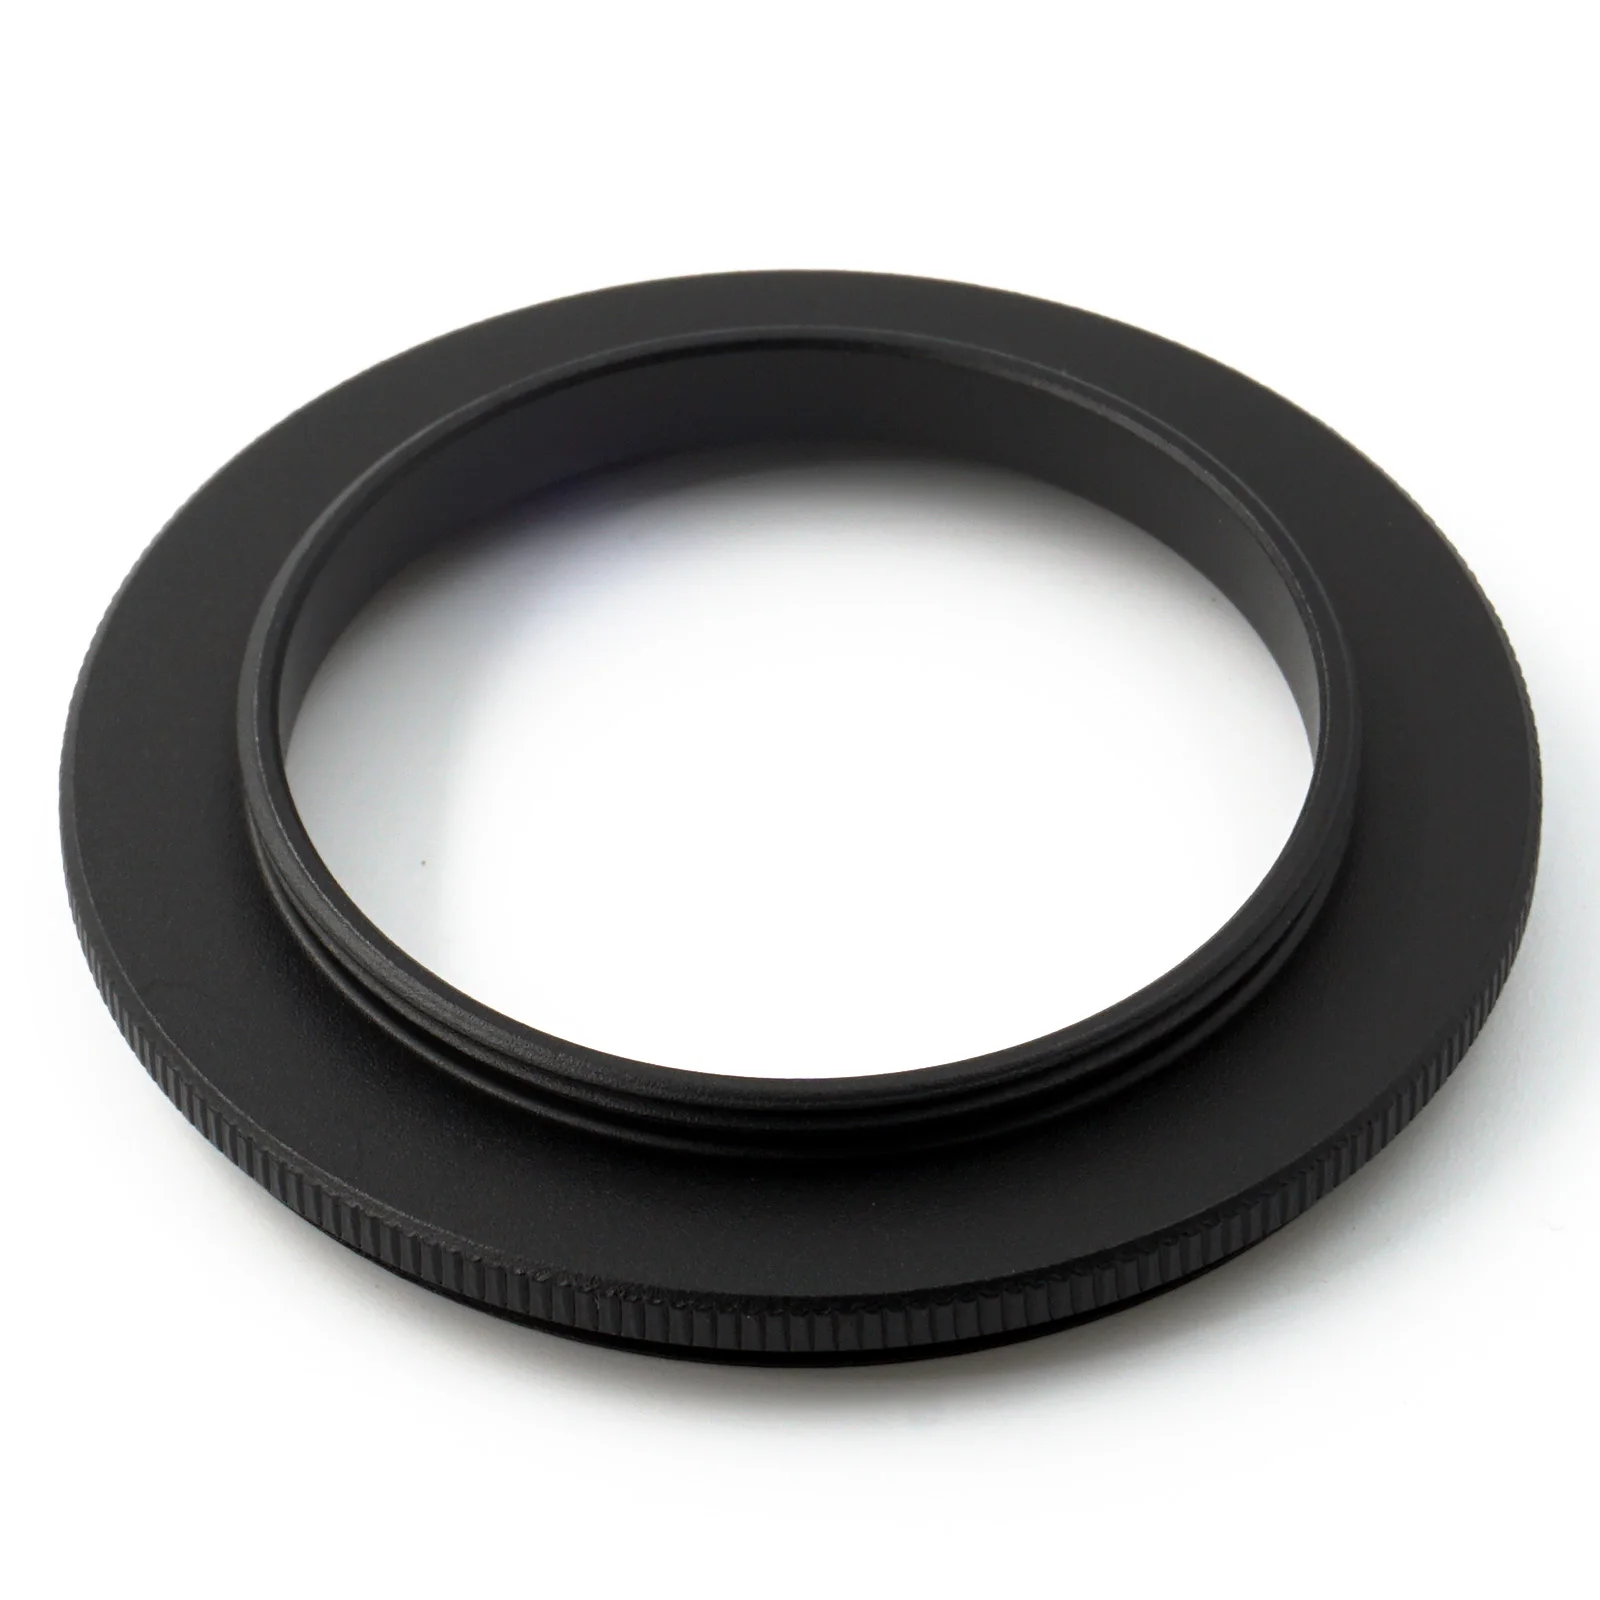 39-49 Male to Male 39mm x1 - 49mm x0.75 Double Outer Thread Lens Adapter